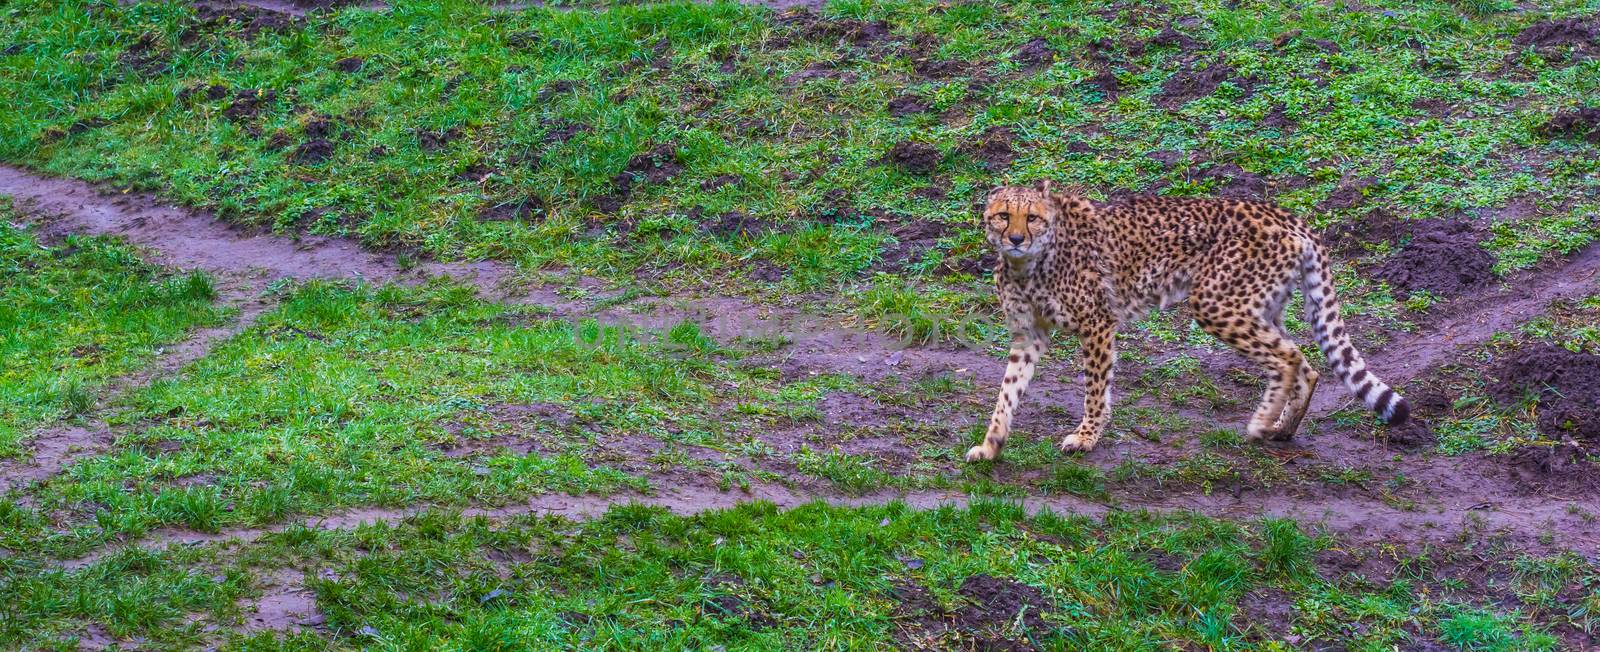 cheetah walking in a pasture and looking towards the camera, threatened cat specie from Africa